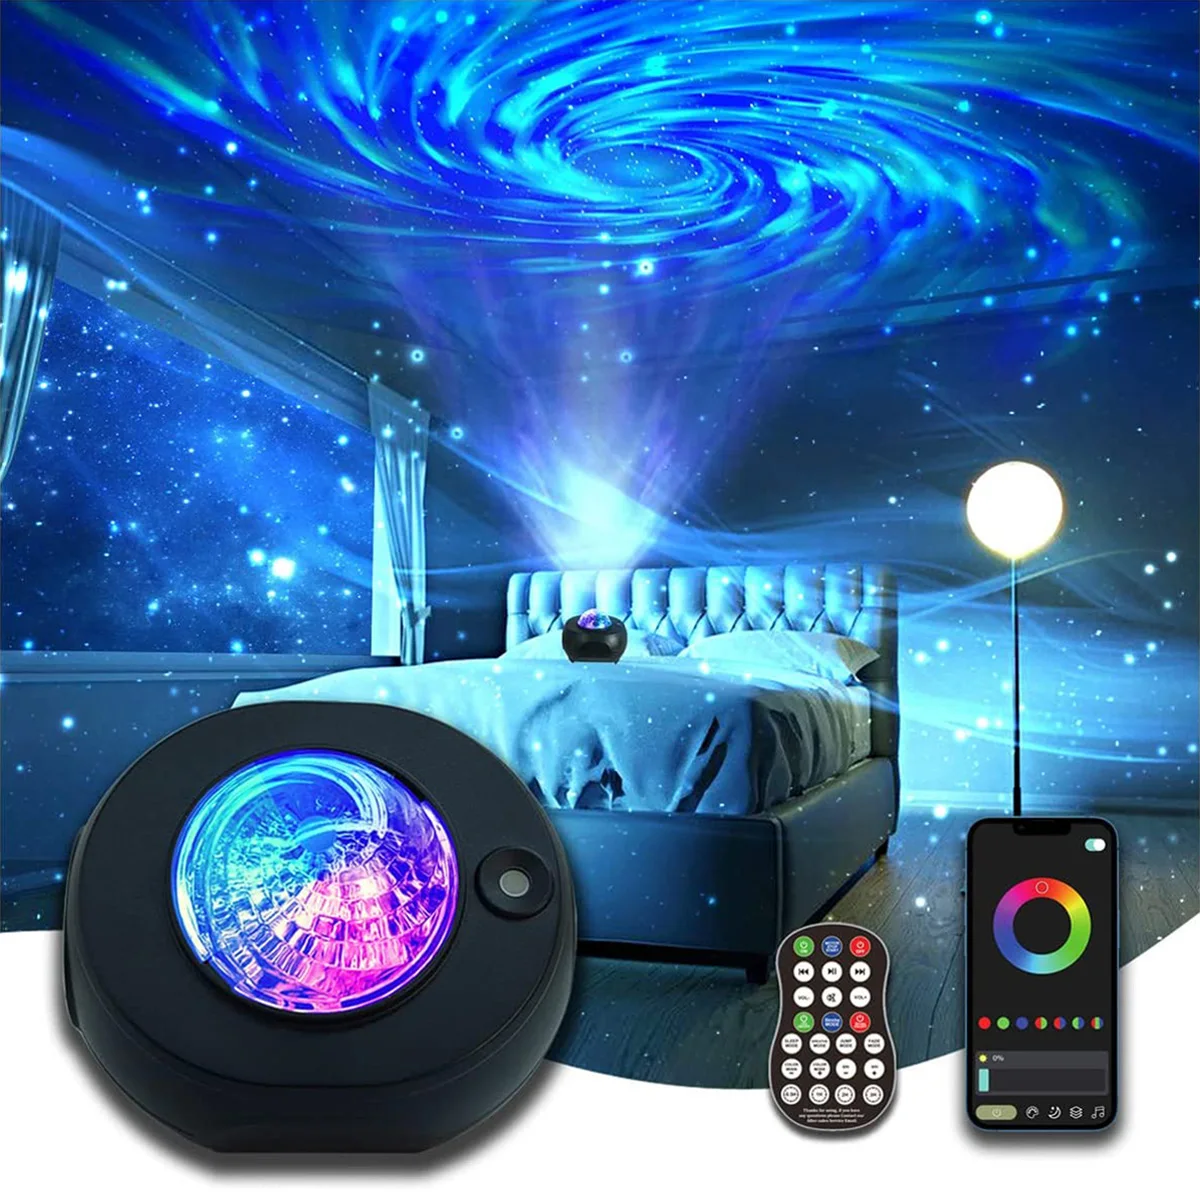 Smart Galaxy Projector Led Star Projector Gaming Room Bedroom Decoration Night Light Starry Sky Laser Star Projector Lamp Gift